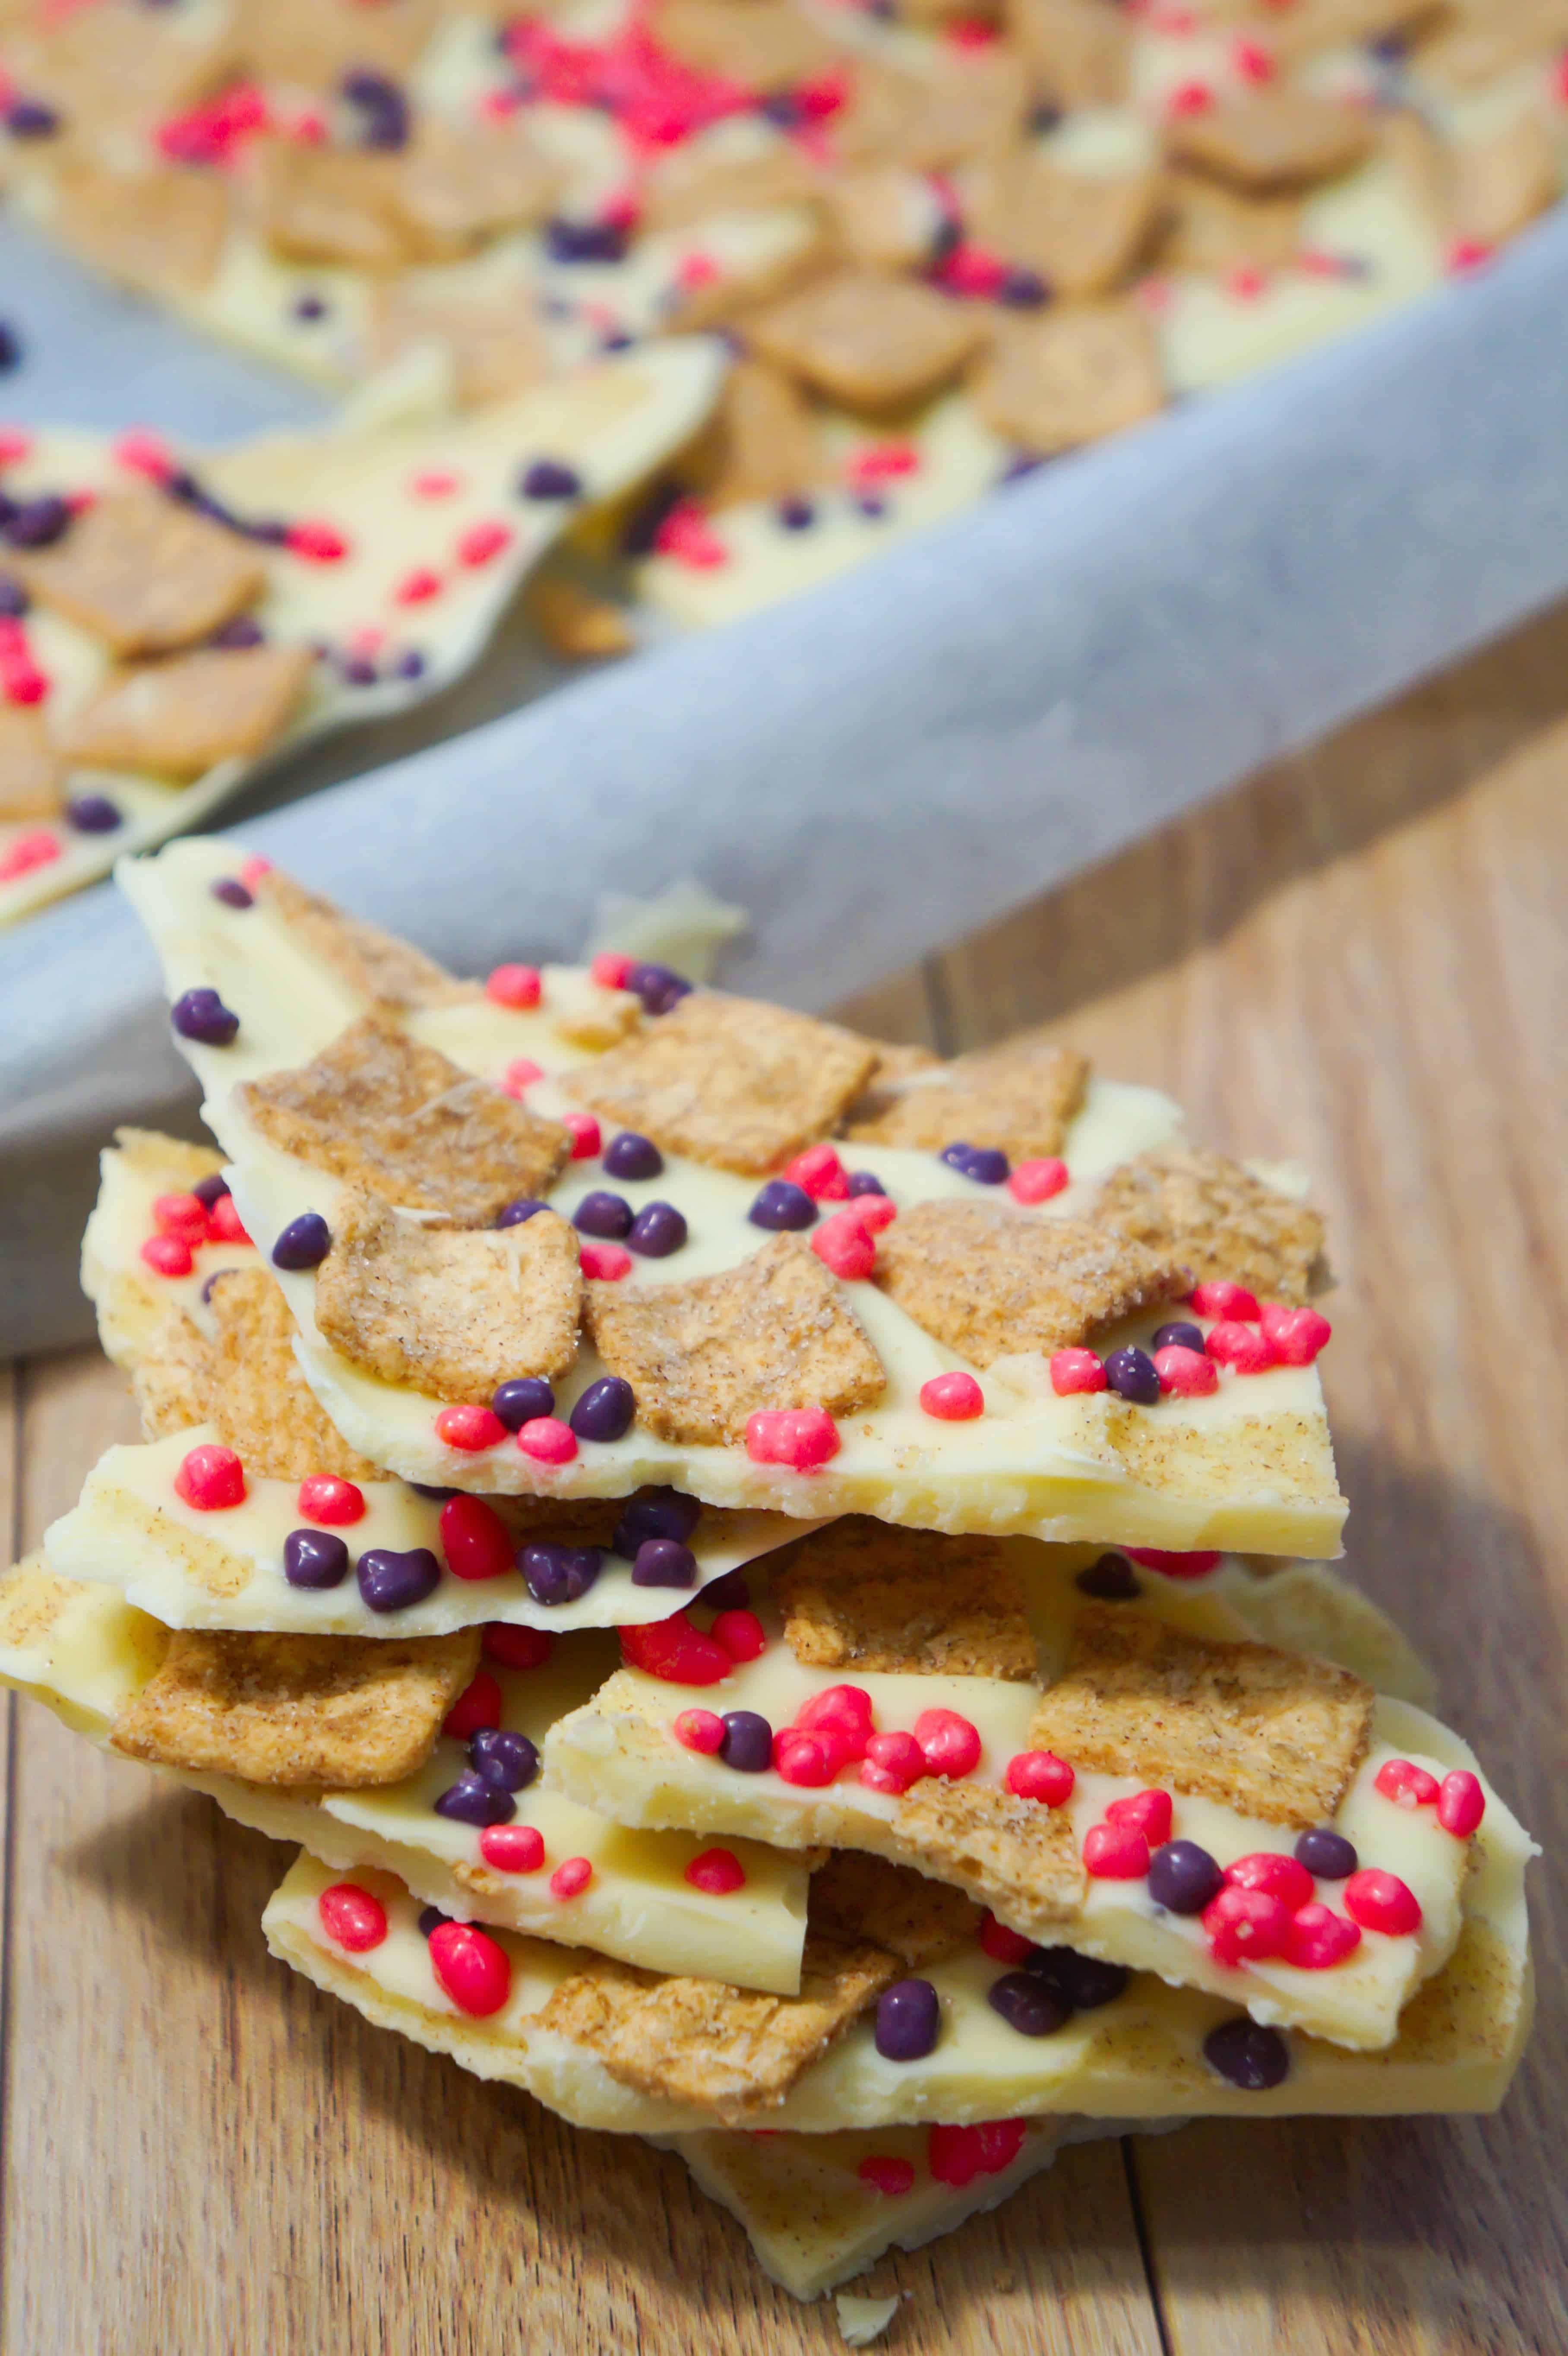 Cinnamon Toast Crunch White Chocolate Bark is an easy no bake dessert recipe. This white chocolate dessert is loaded with Cinnamon Toast Crunch Cereal and pink and purple Nerds candies.